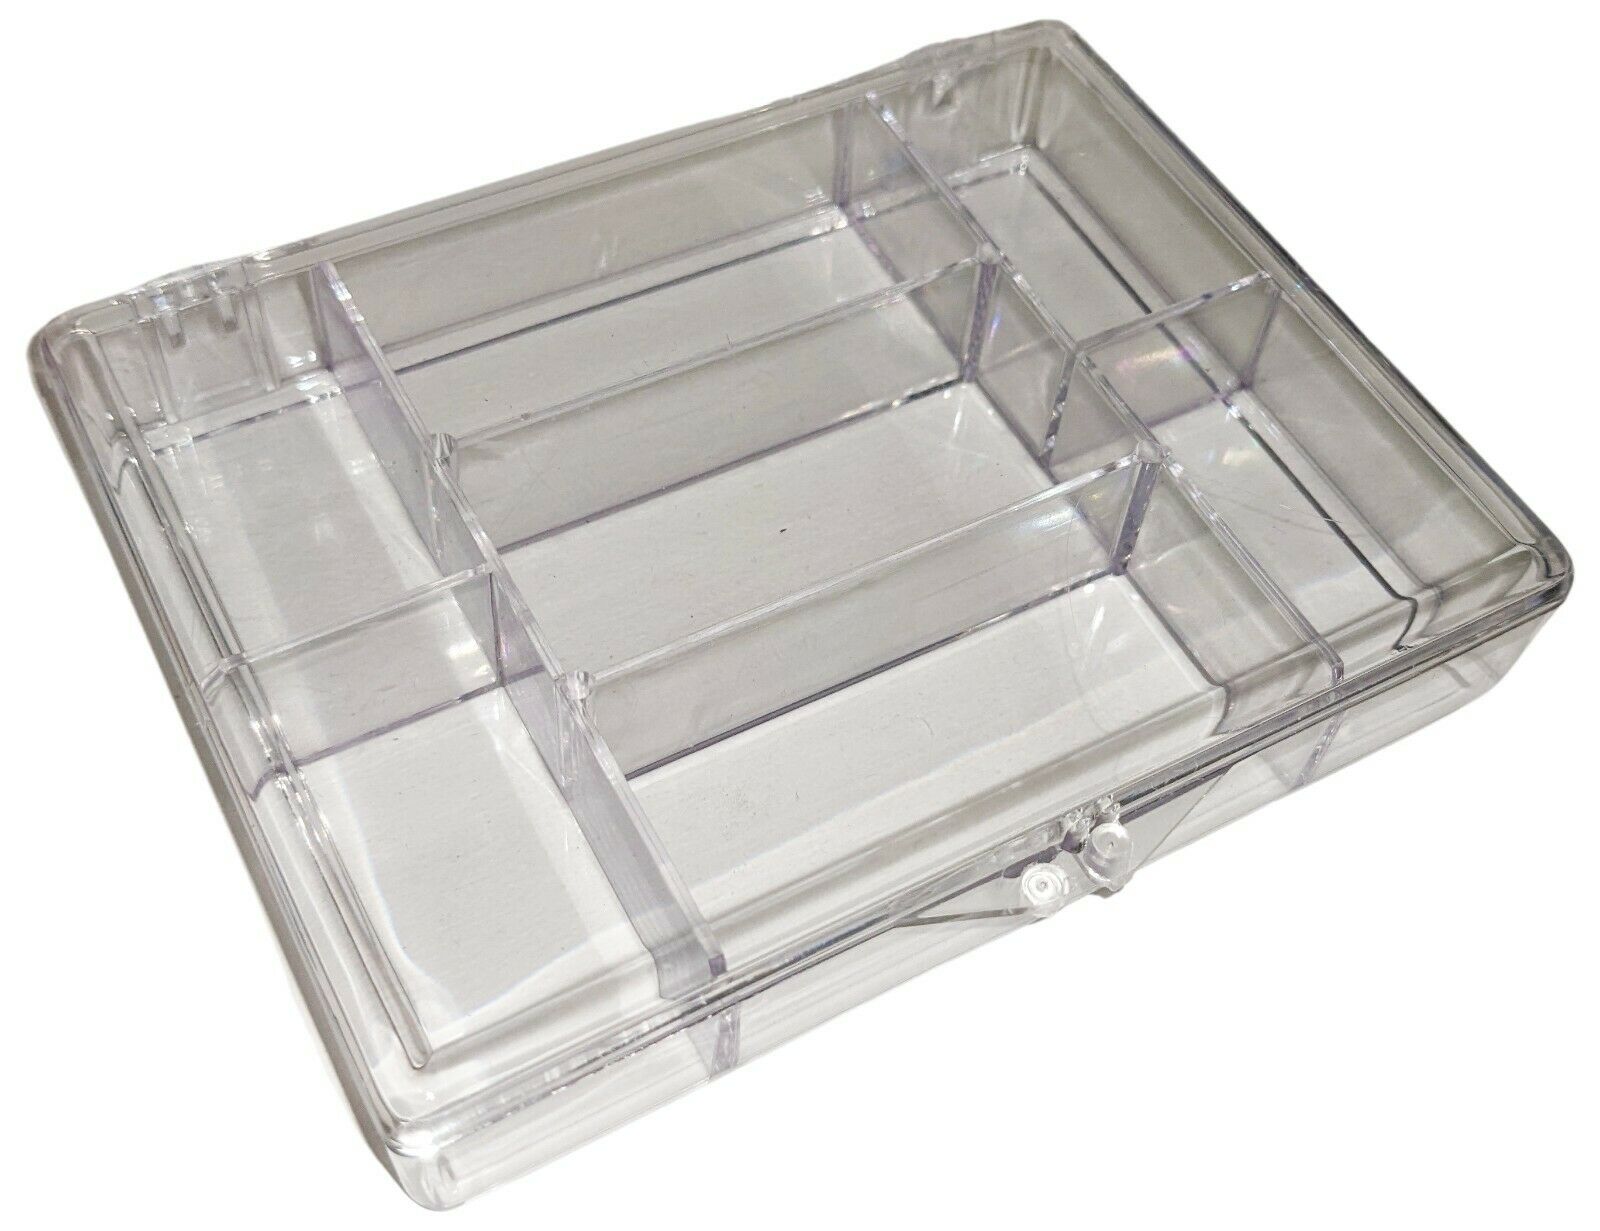 Polypropylene Portable Storage Box, 7 Fixed Divisions (4.77 x